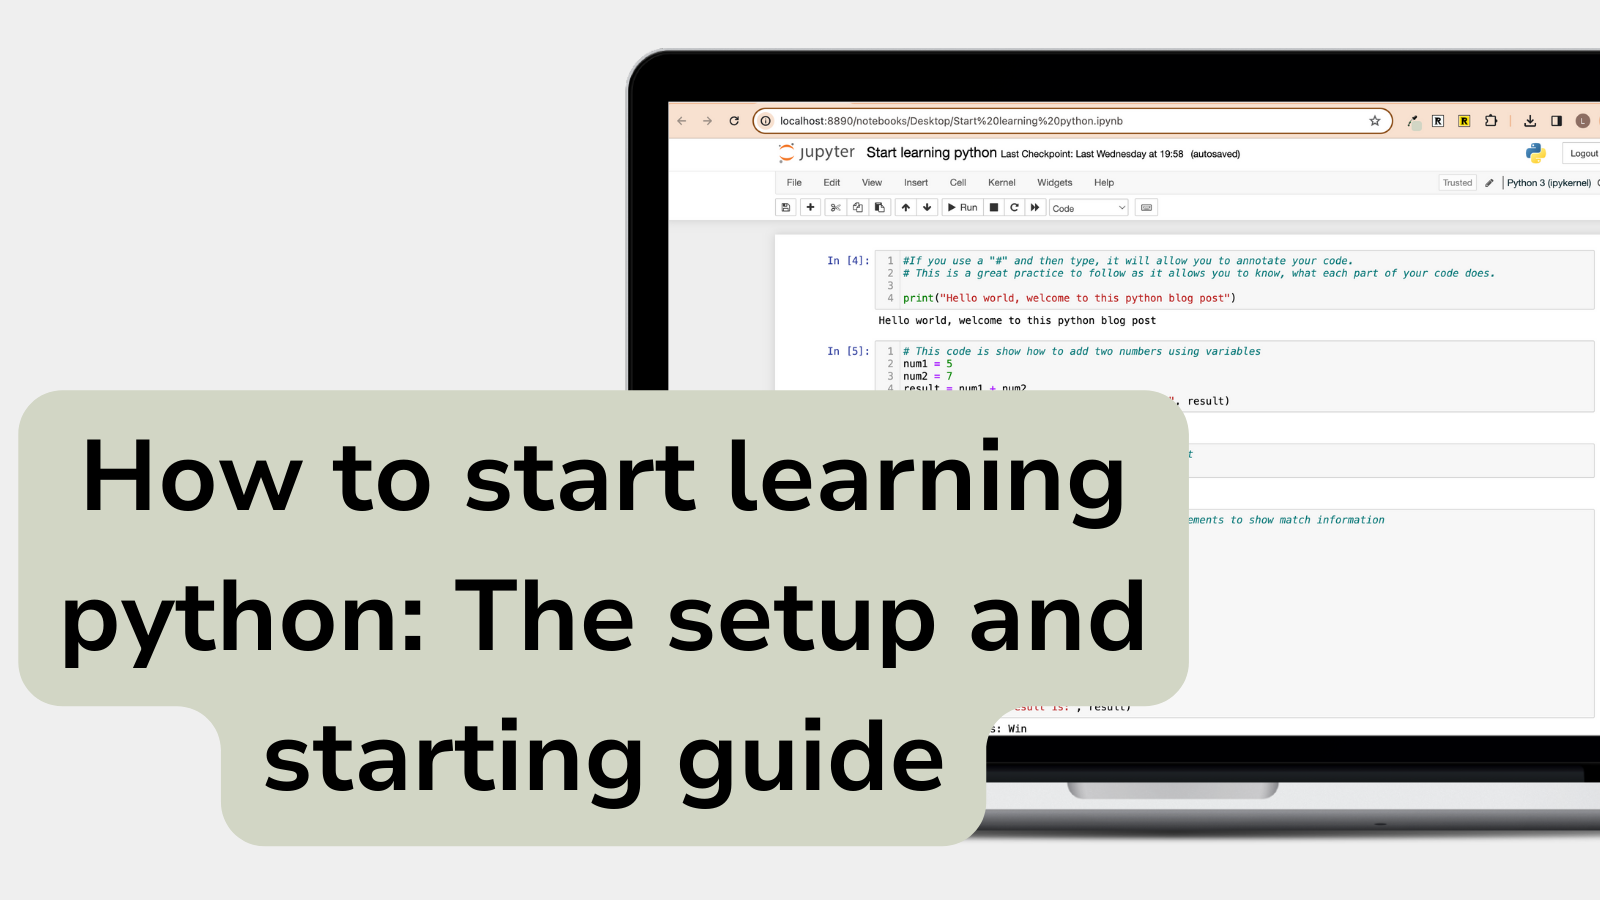 How to start learning python: The setup and starting guide